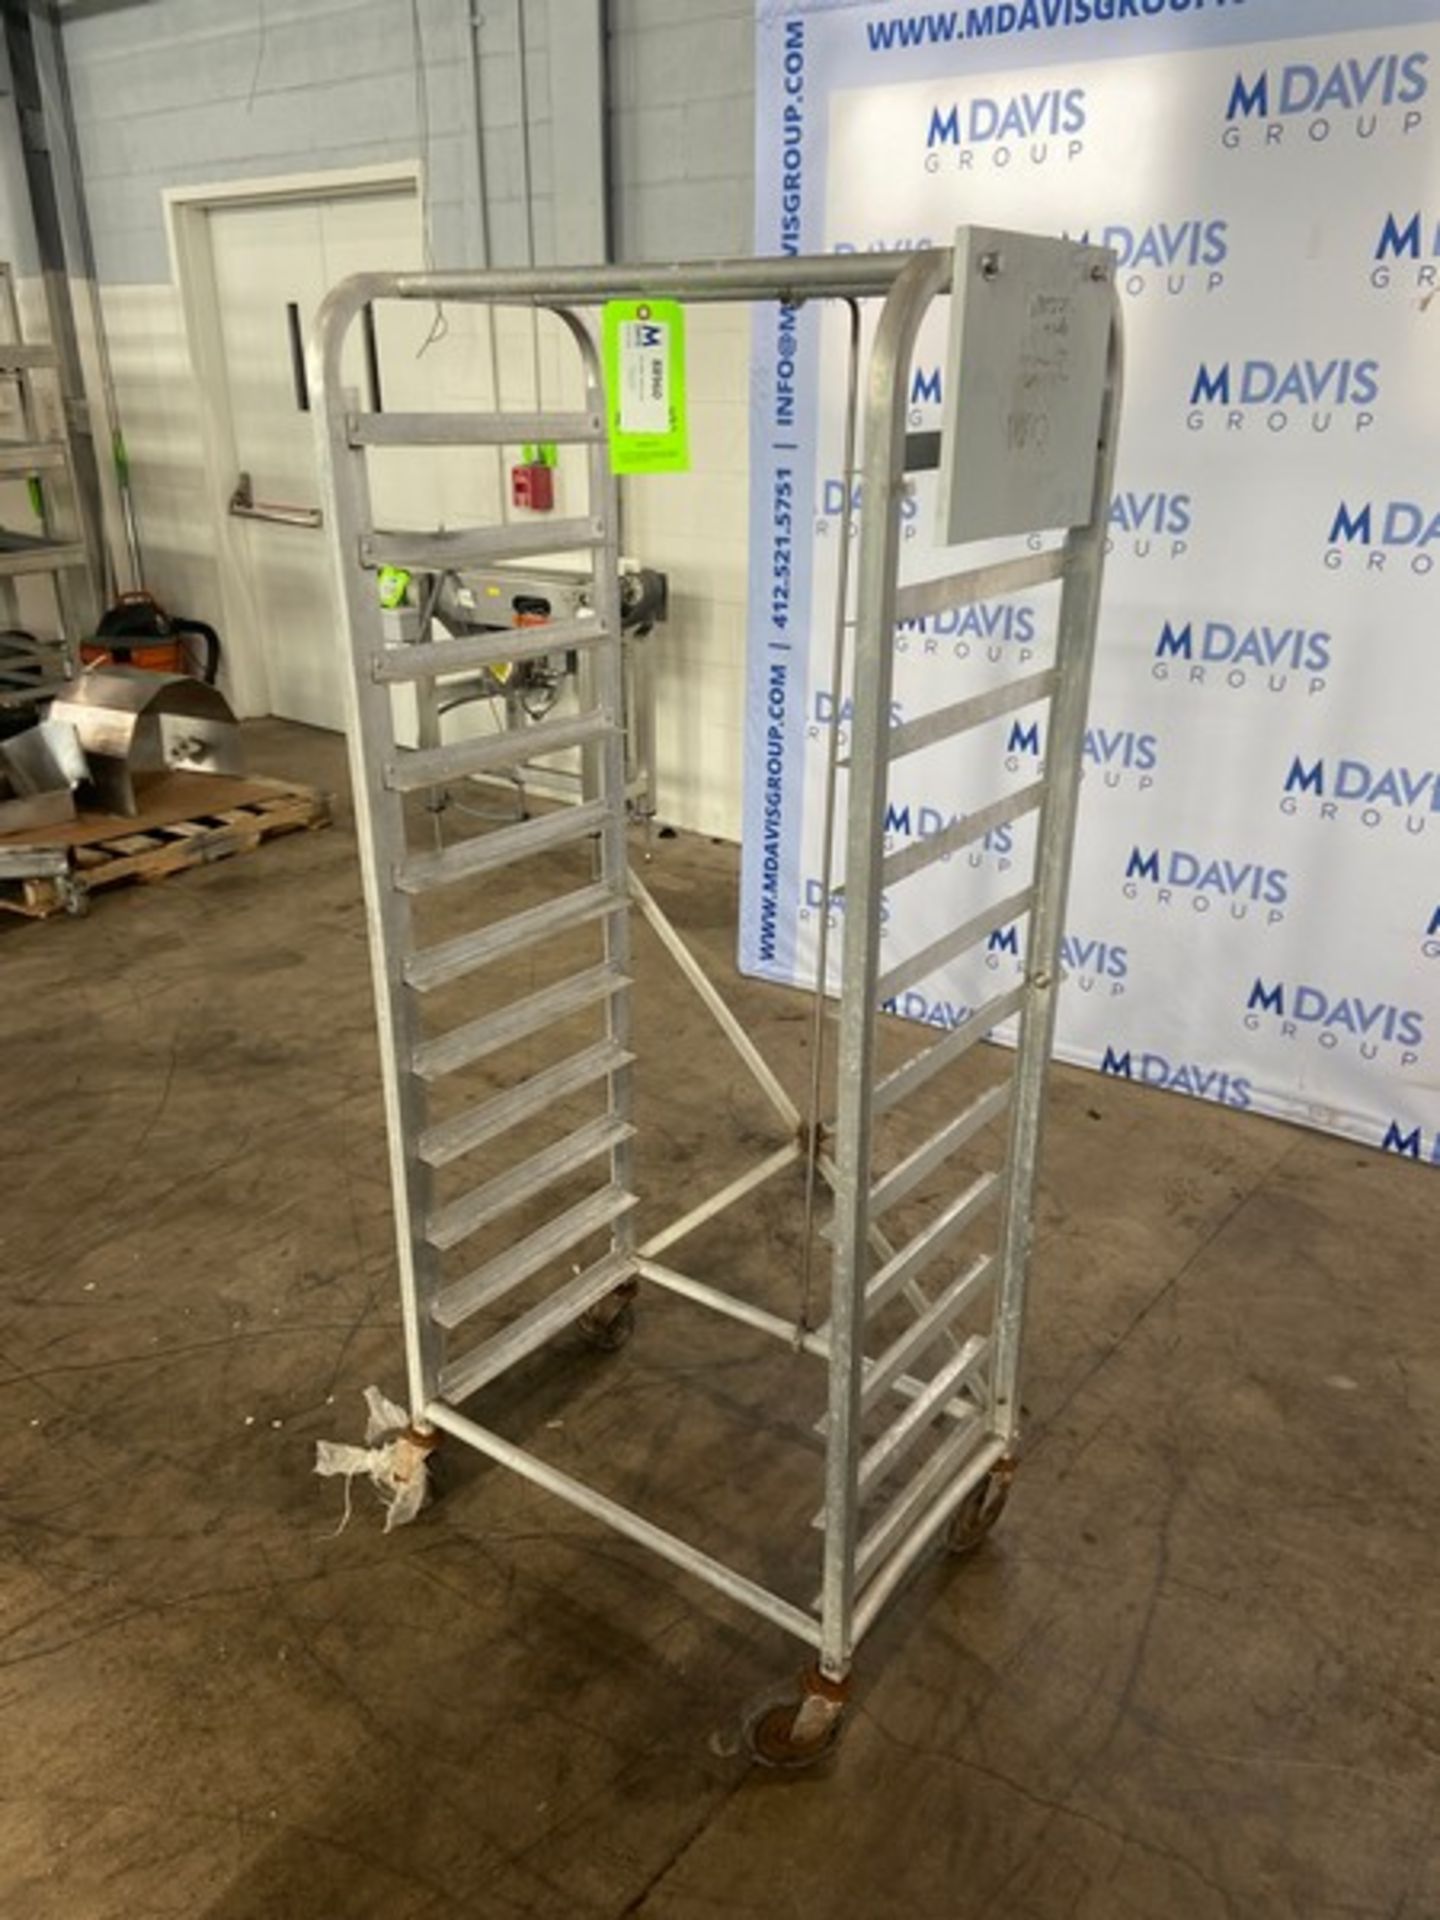 11-Slot Bakery Pan Rack,Mounted on (4) Casters (INV#88960) (Located @ the MDG Auction Showroom 2.0 - Image 2 of 3